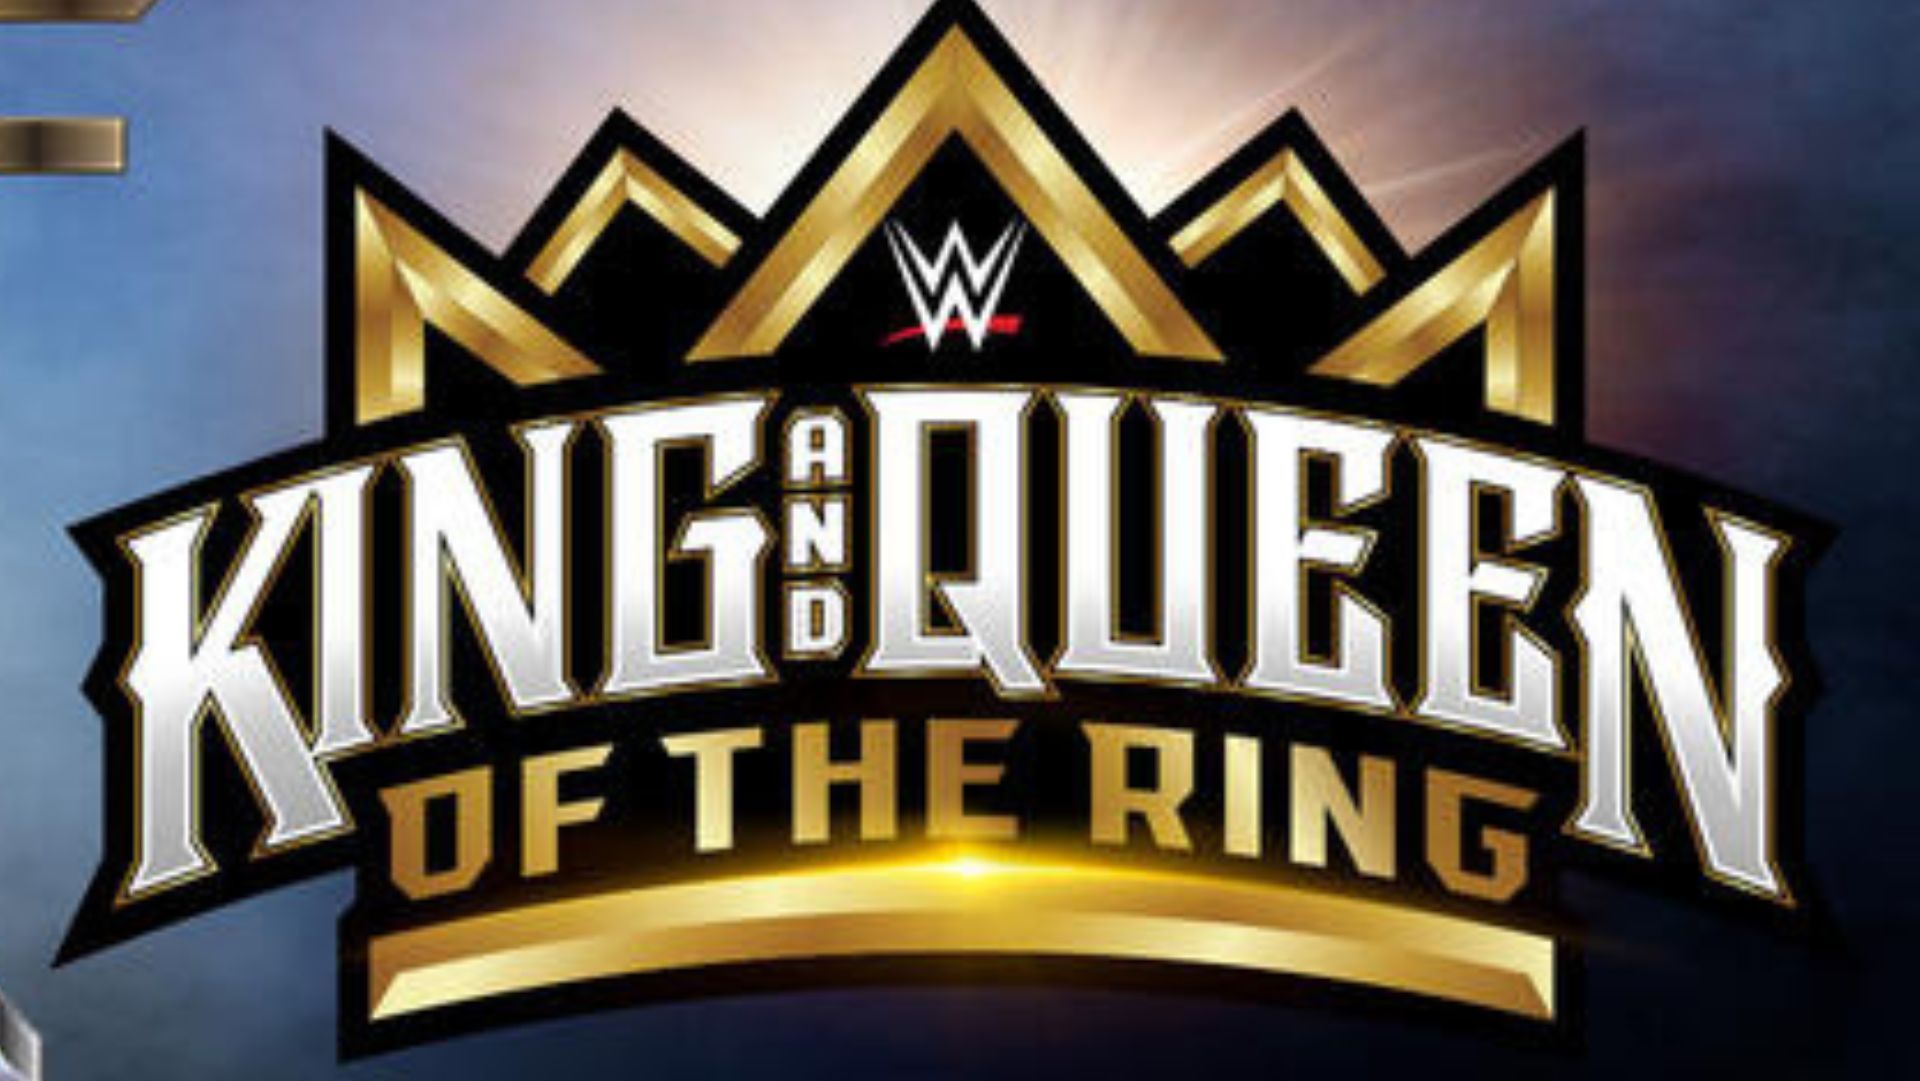 King and Queen of the Ring winners will get title shots.